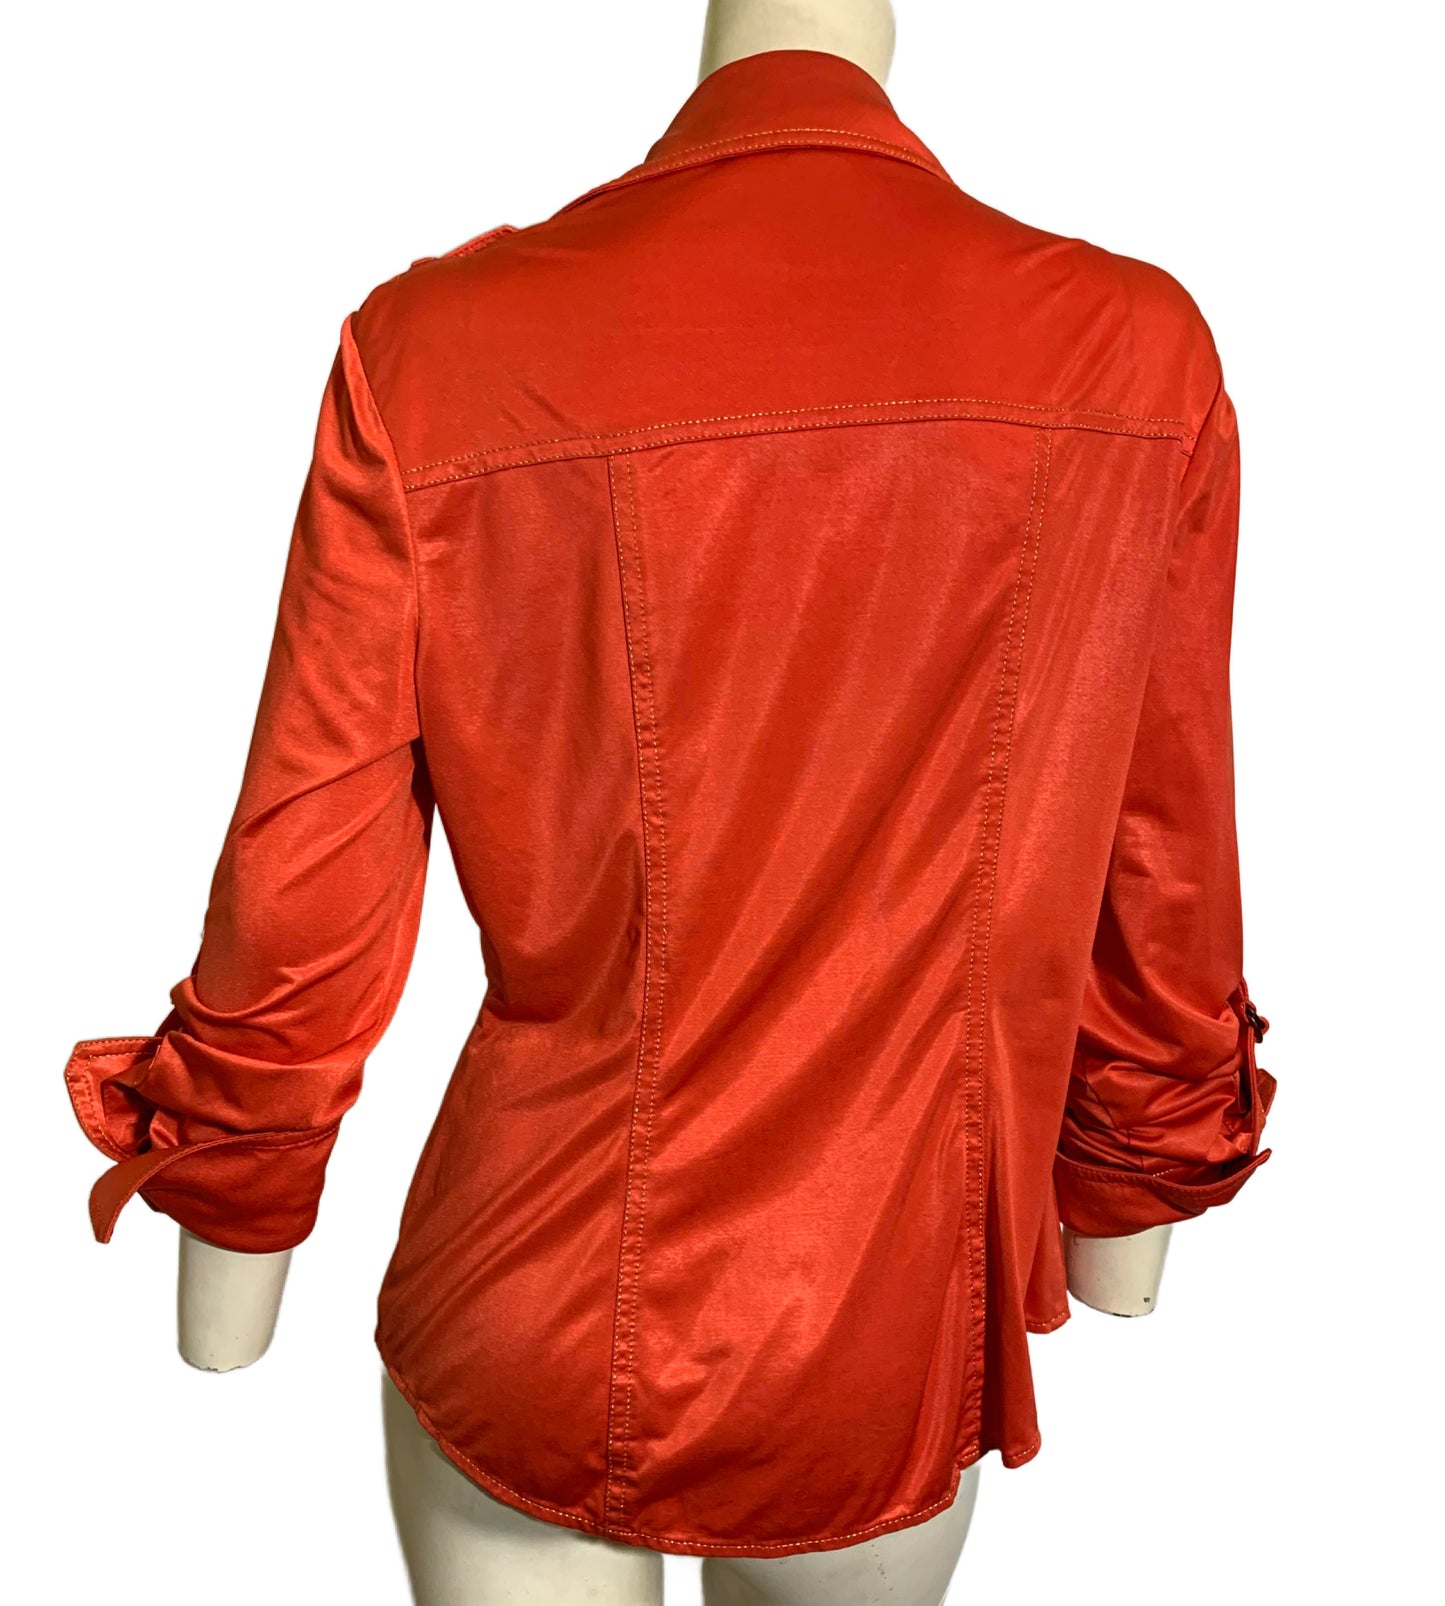 Shimmering Metallic Red Disco Blouse with Epaulets circa 1990s